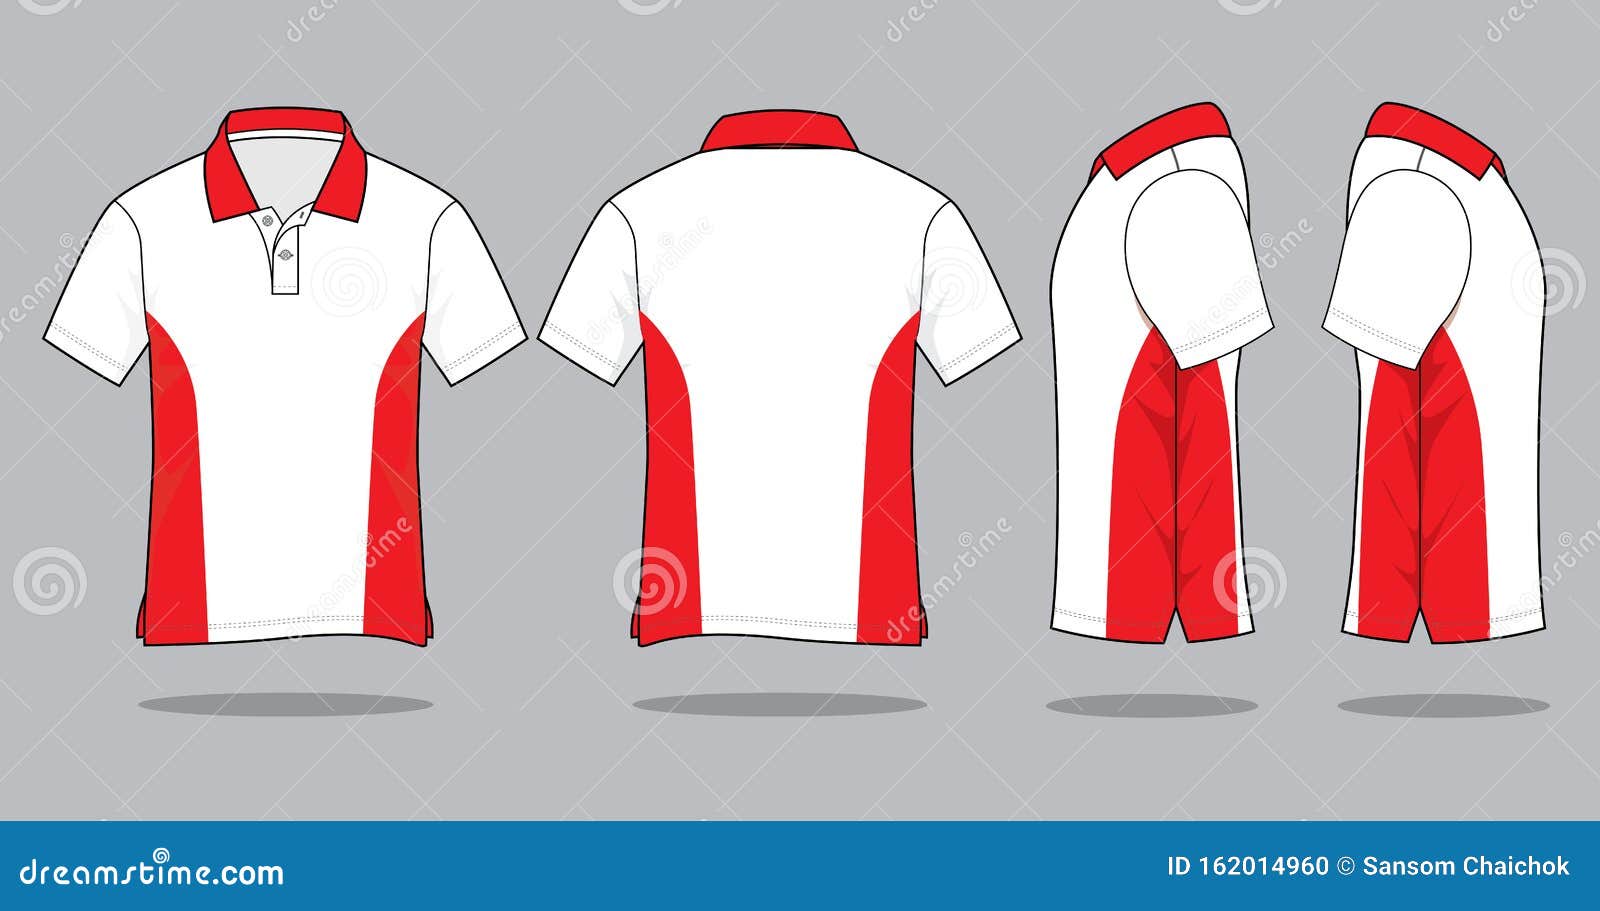 Baseball Jersey Template Ideas In White Gray Blue And Red Stock